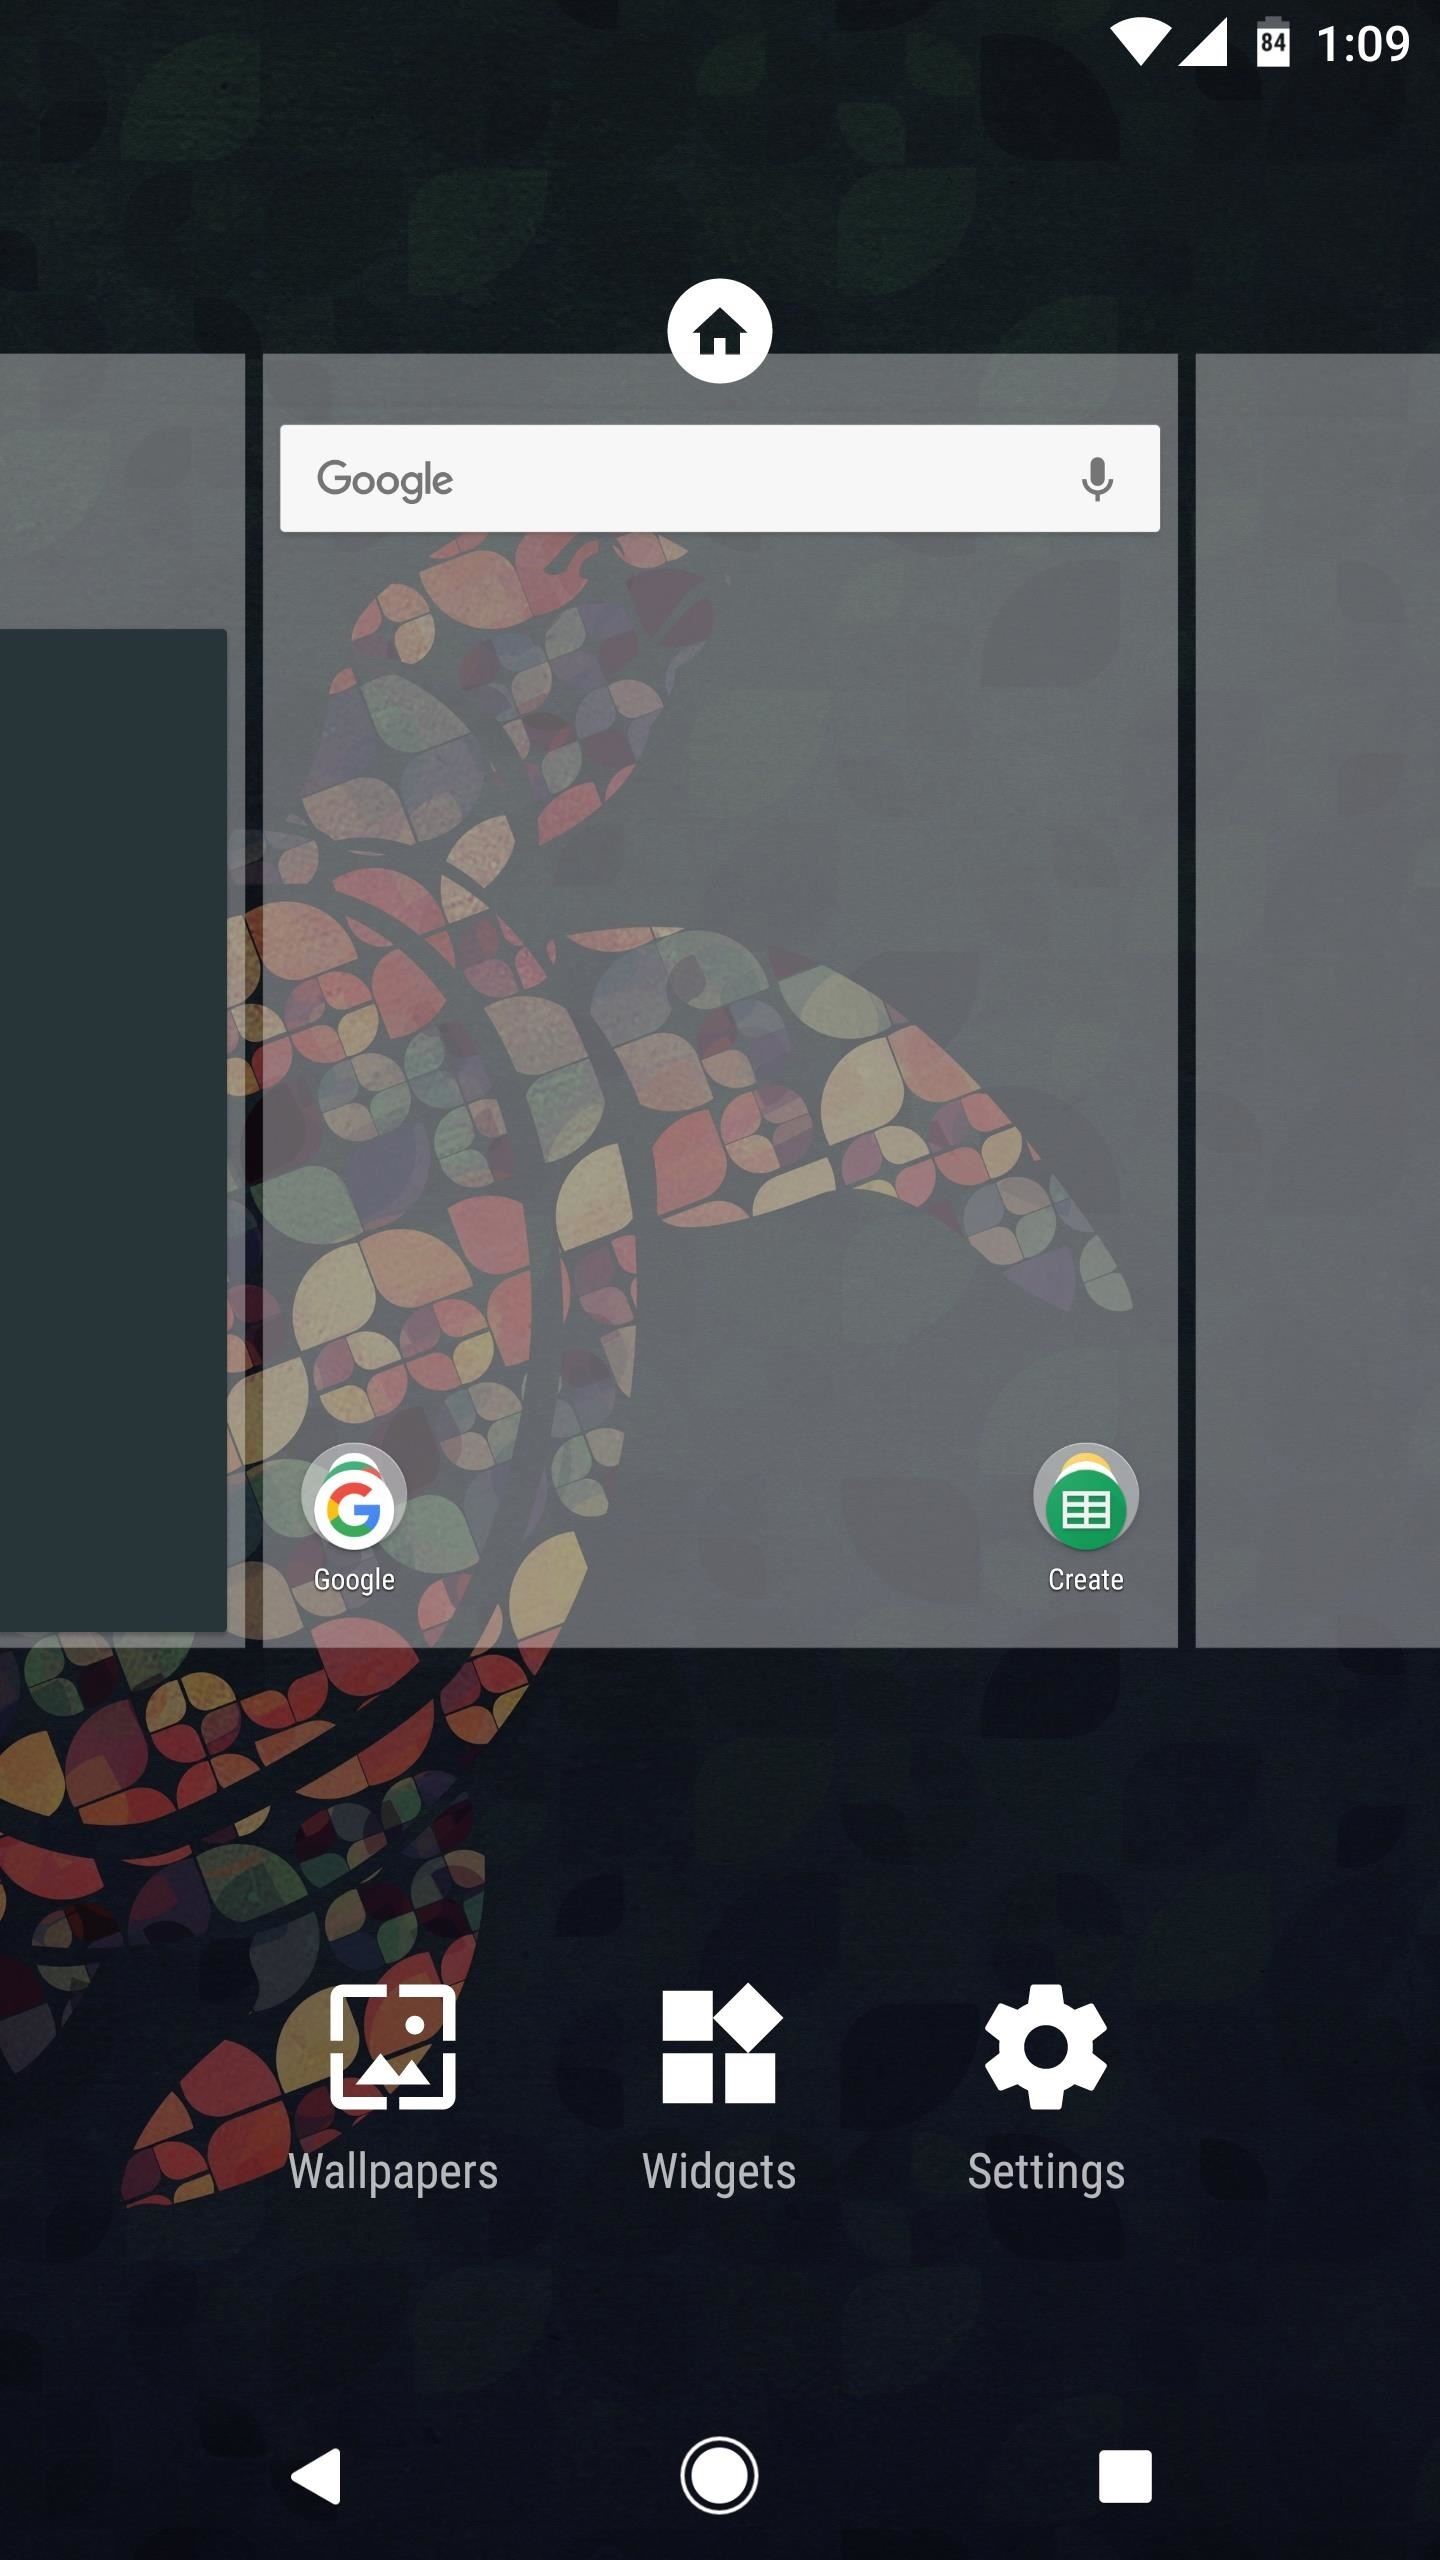 Nova Launcher 101: How to Enable Google Now Integration on Your Home Screen